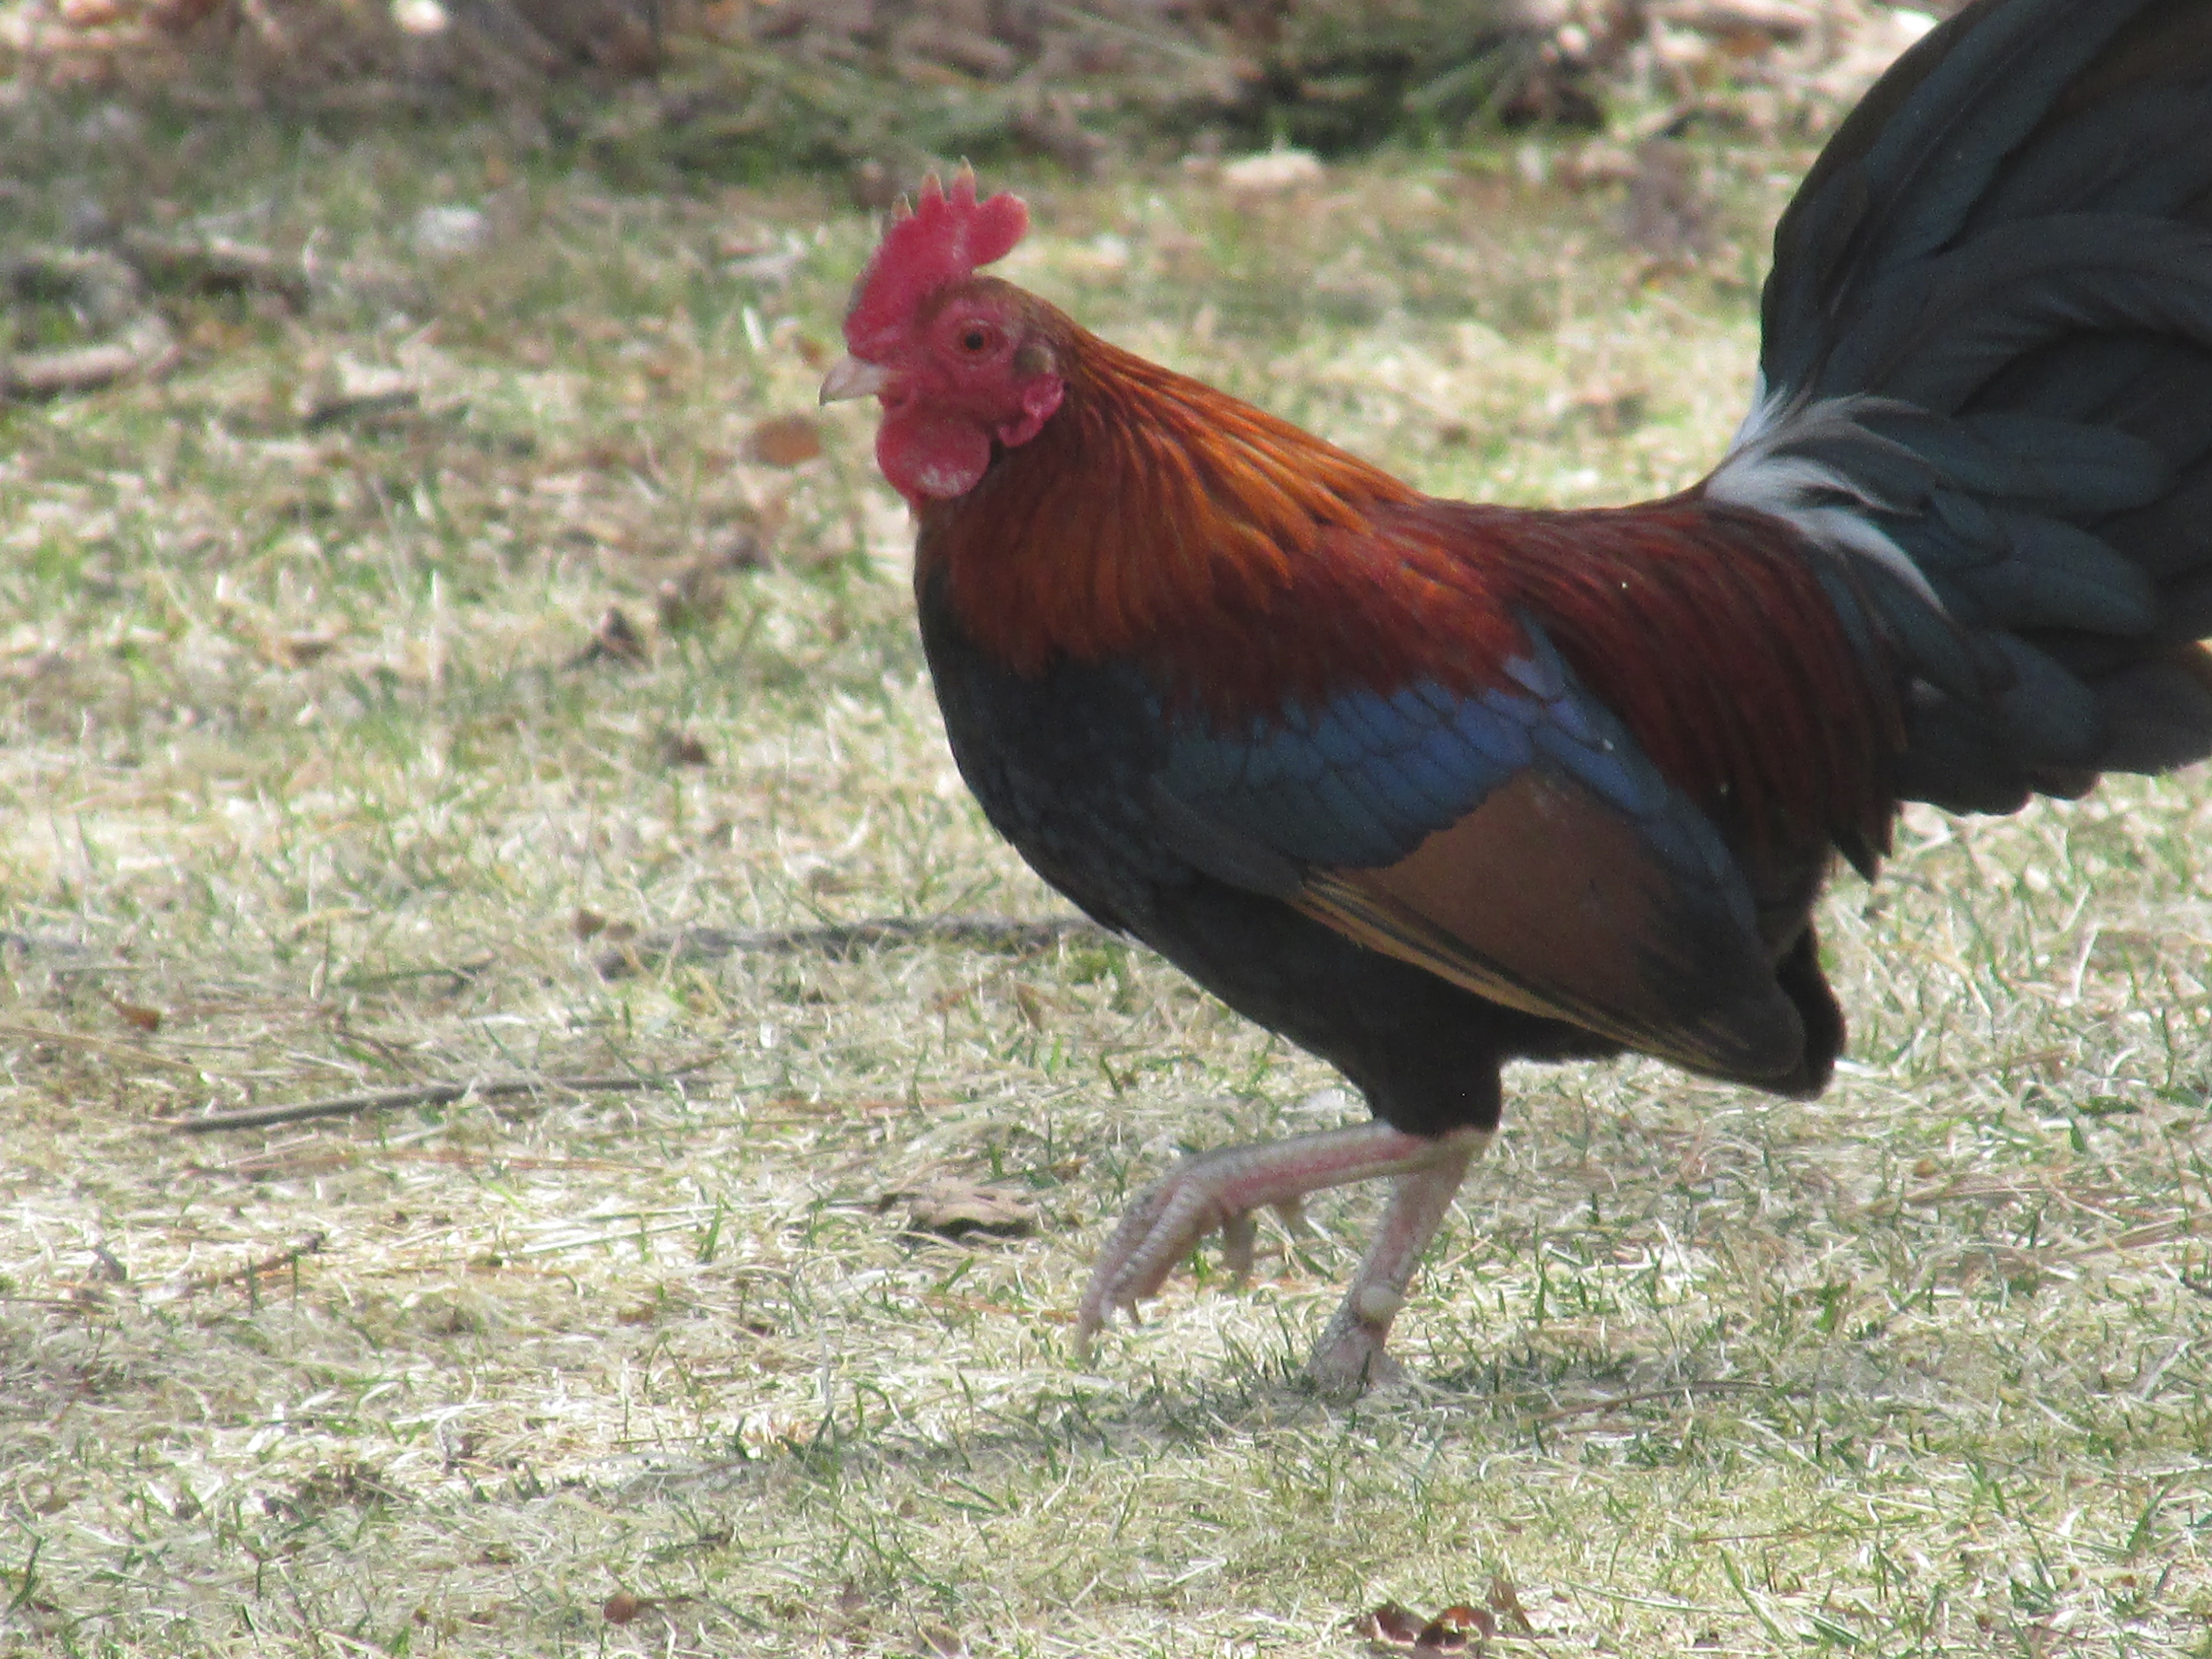 Mopsy- old english game bantam rooster